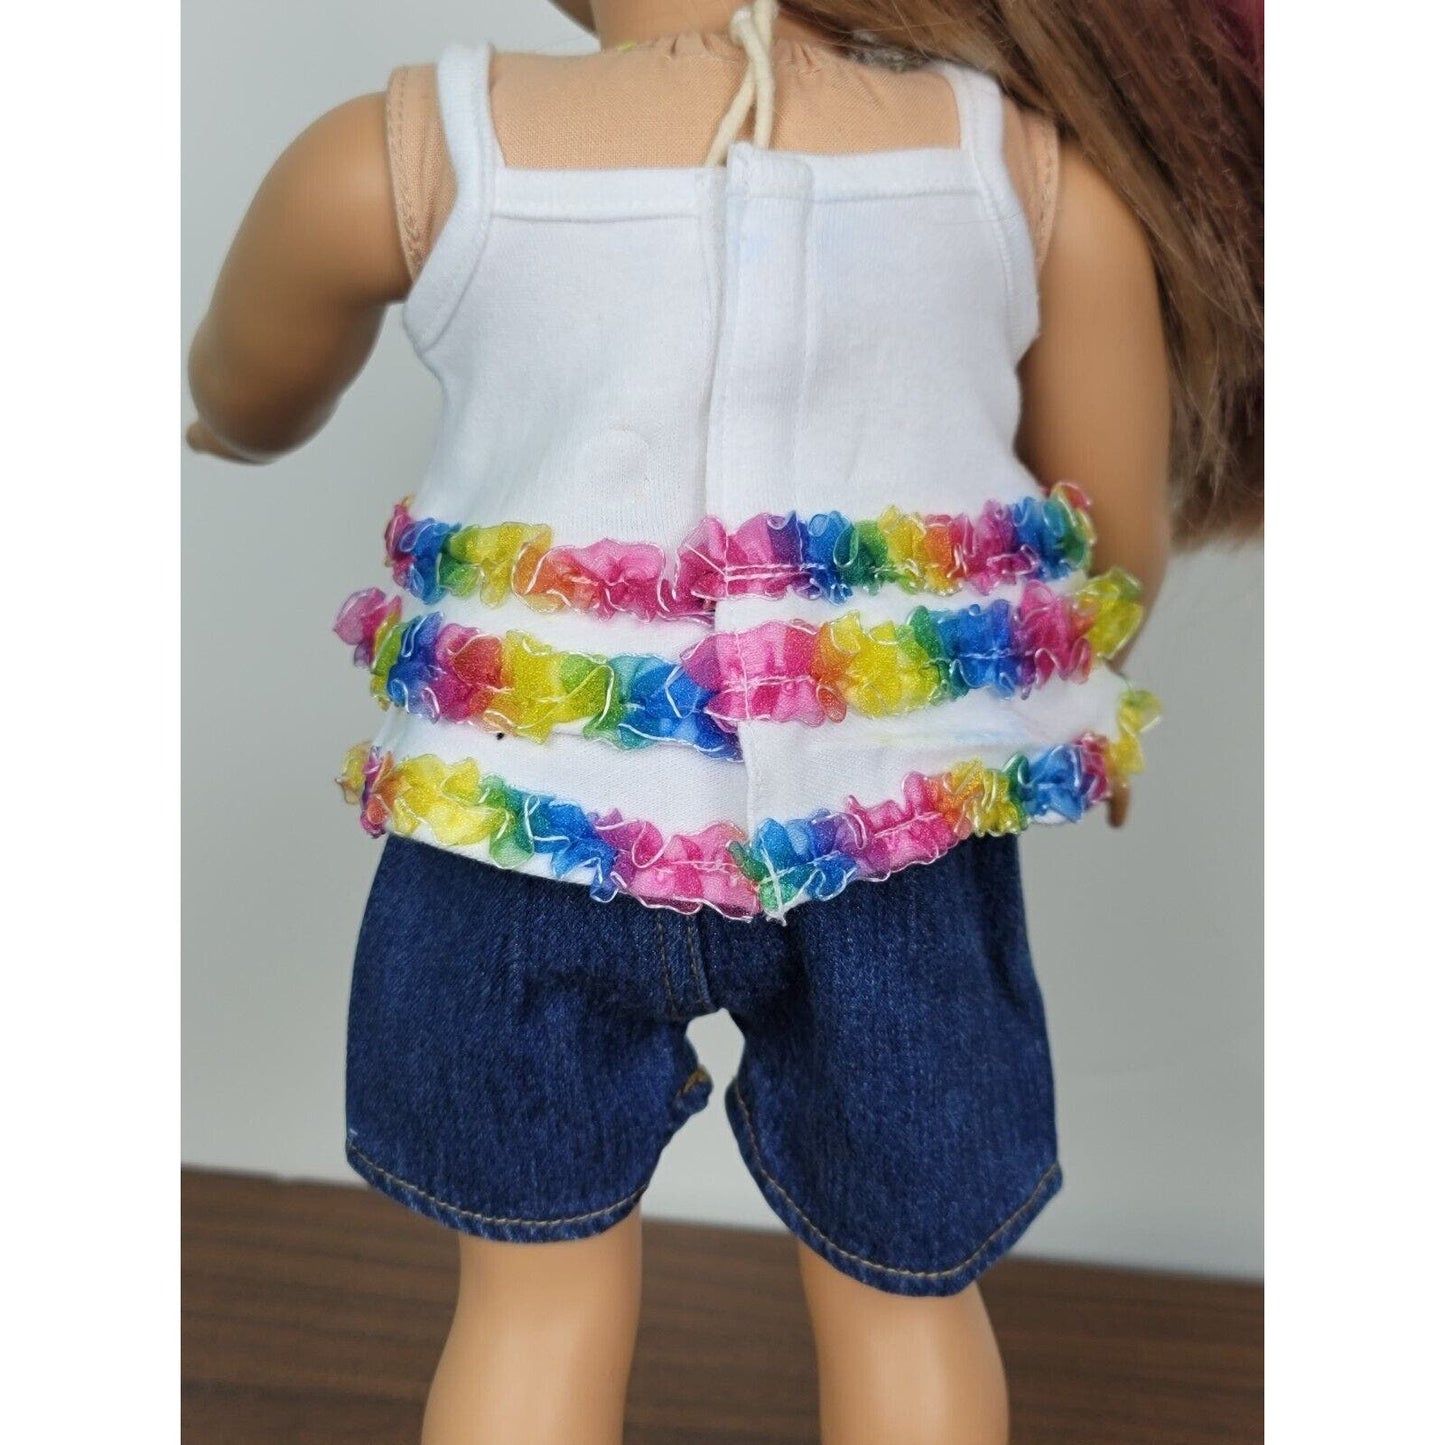 Doll Clothes Floral Summer Complete Outfit Glasses Shoes Tank Shorts fits 18"